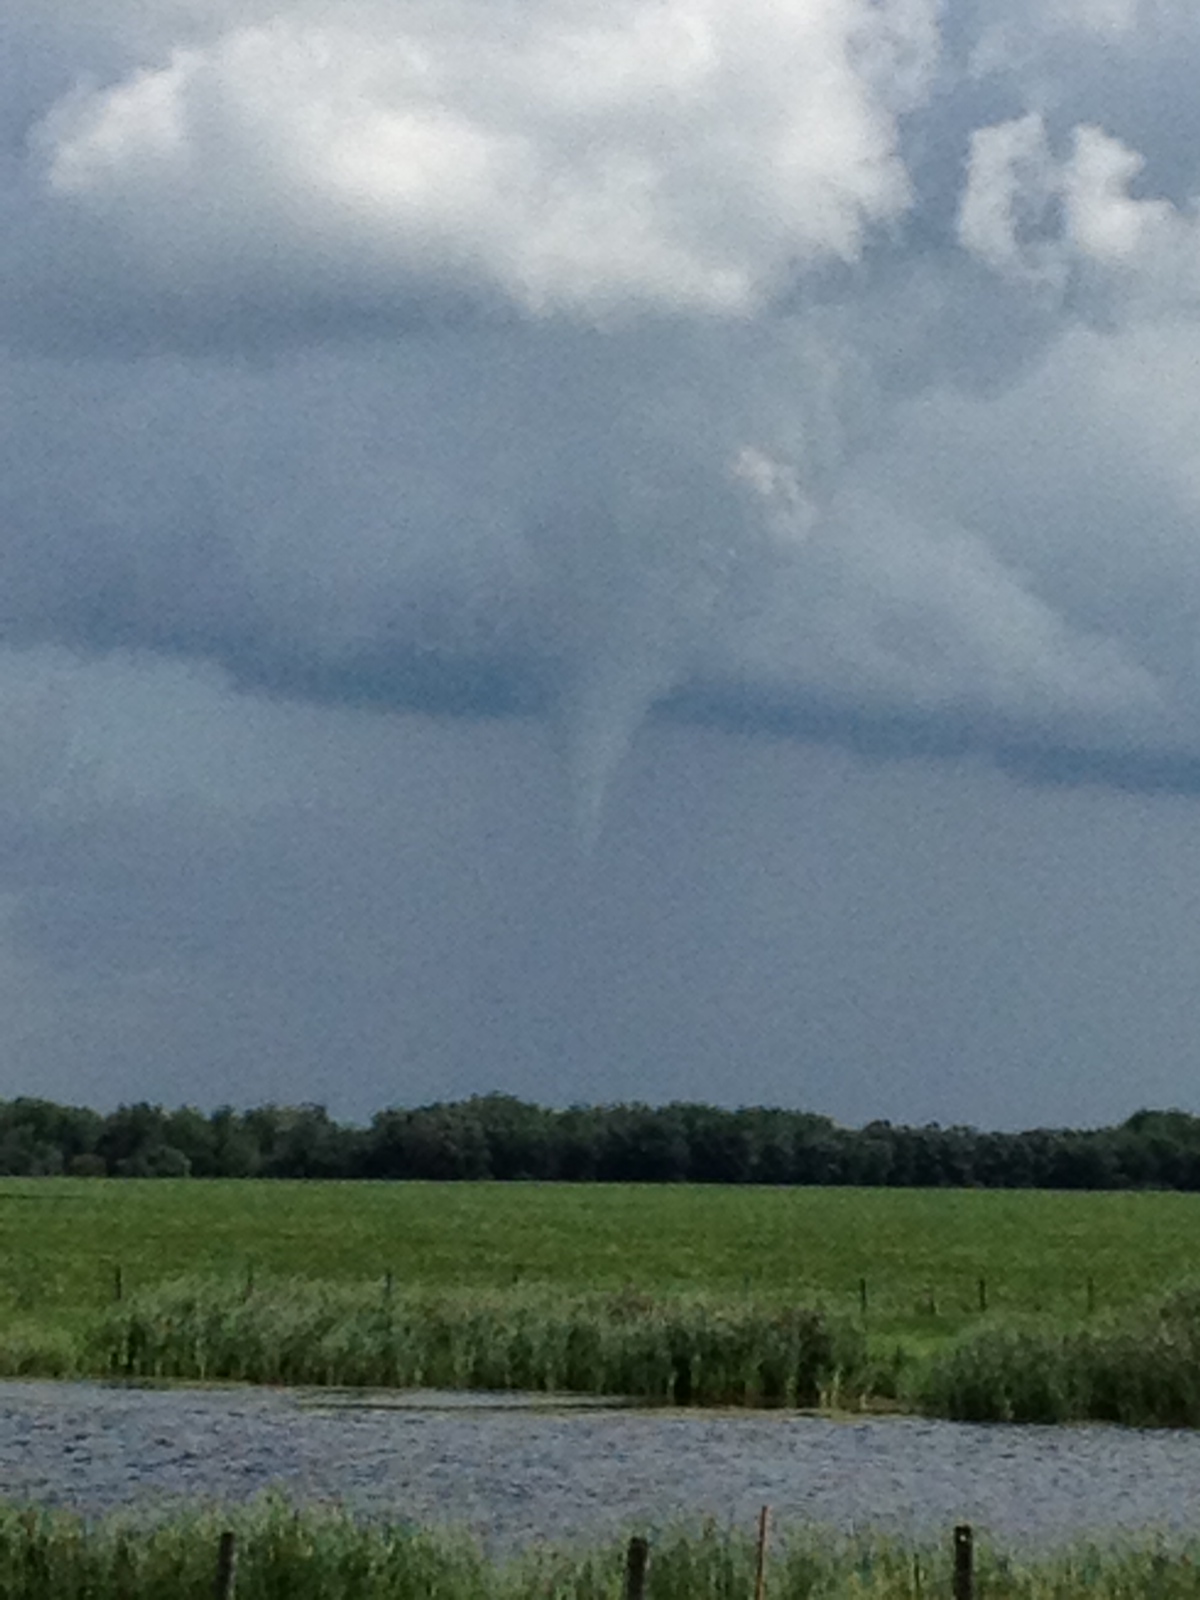 A funnel cloud forms east of Morris, Man., at about 2:30 p.m. Wednesday. Environment Canada confirmed a tornado touched down in the area at about 2:45 p.m.